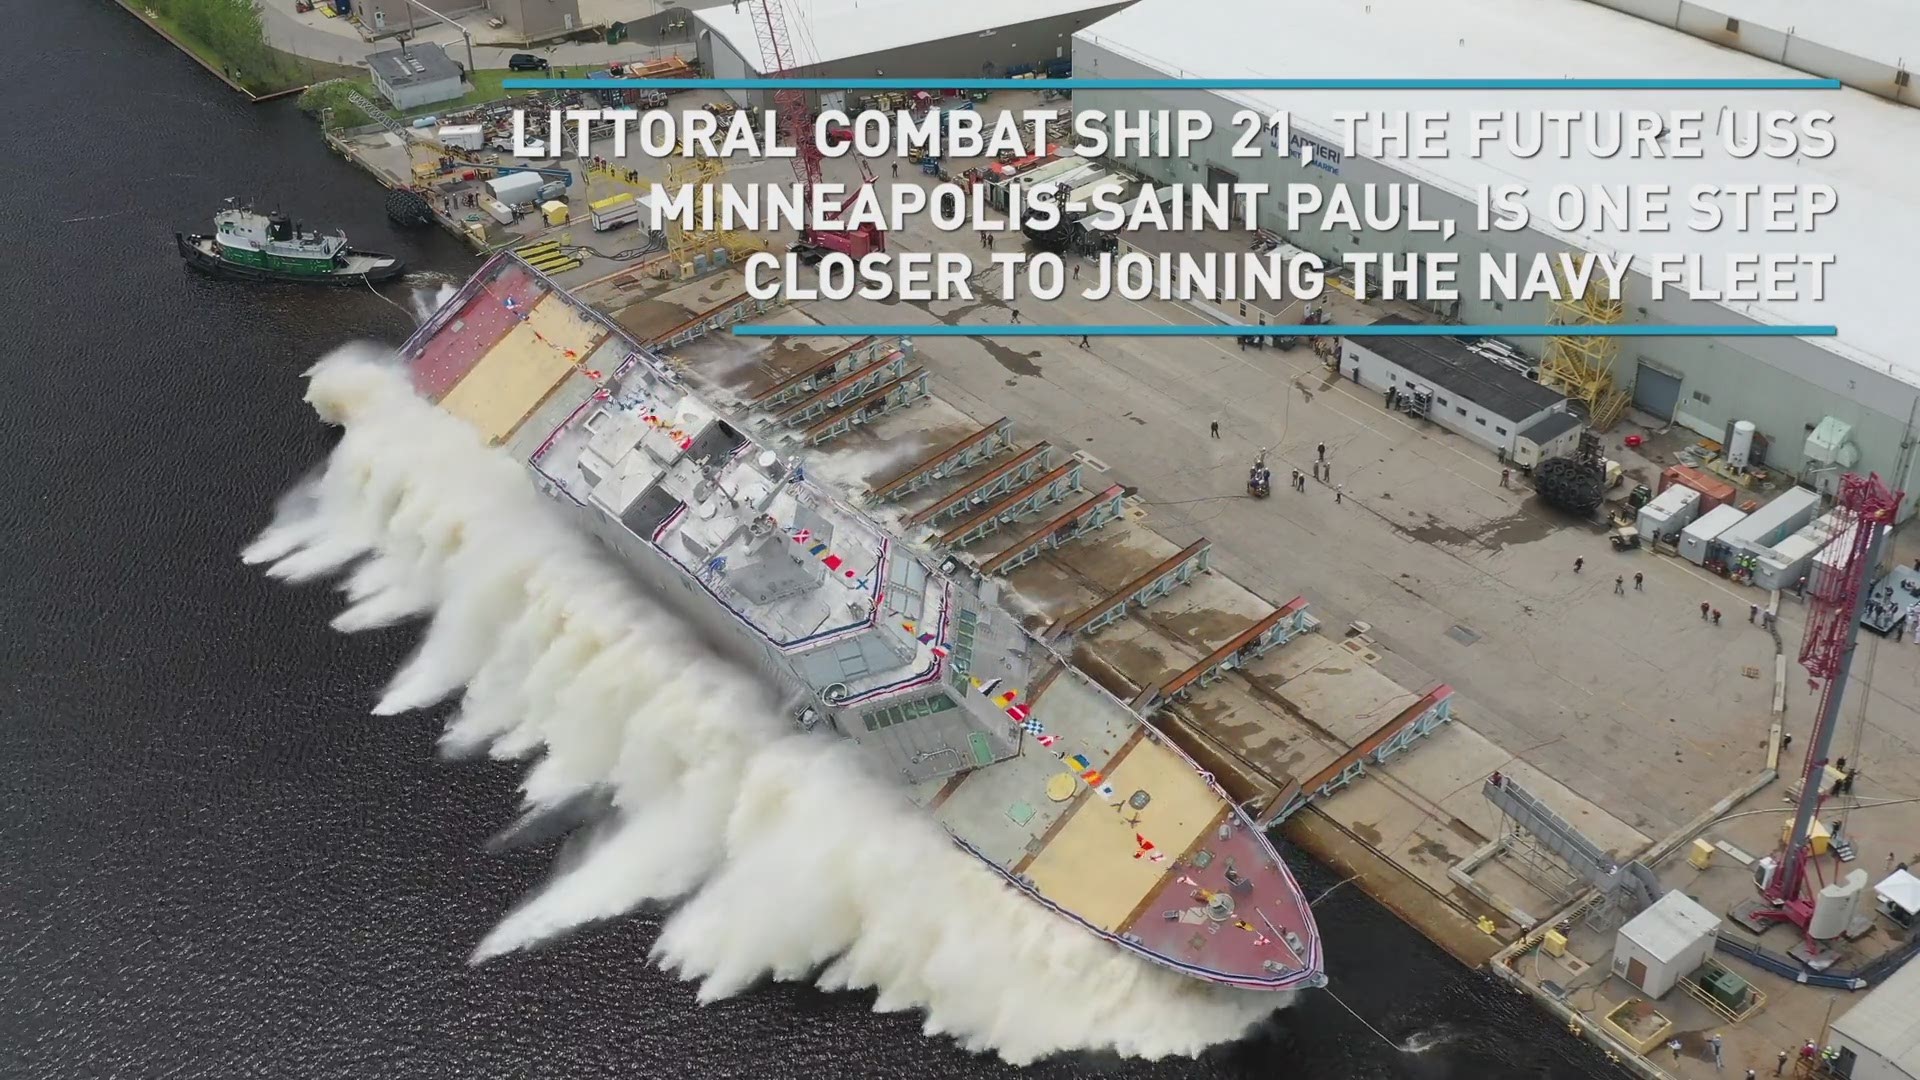 Video of the christening and launch of USS Minneapolis St. Paul.